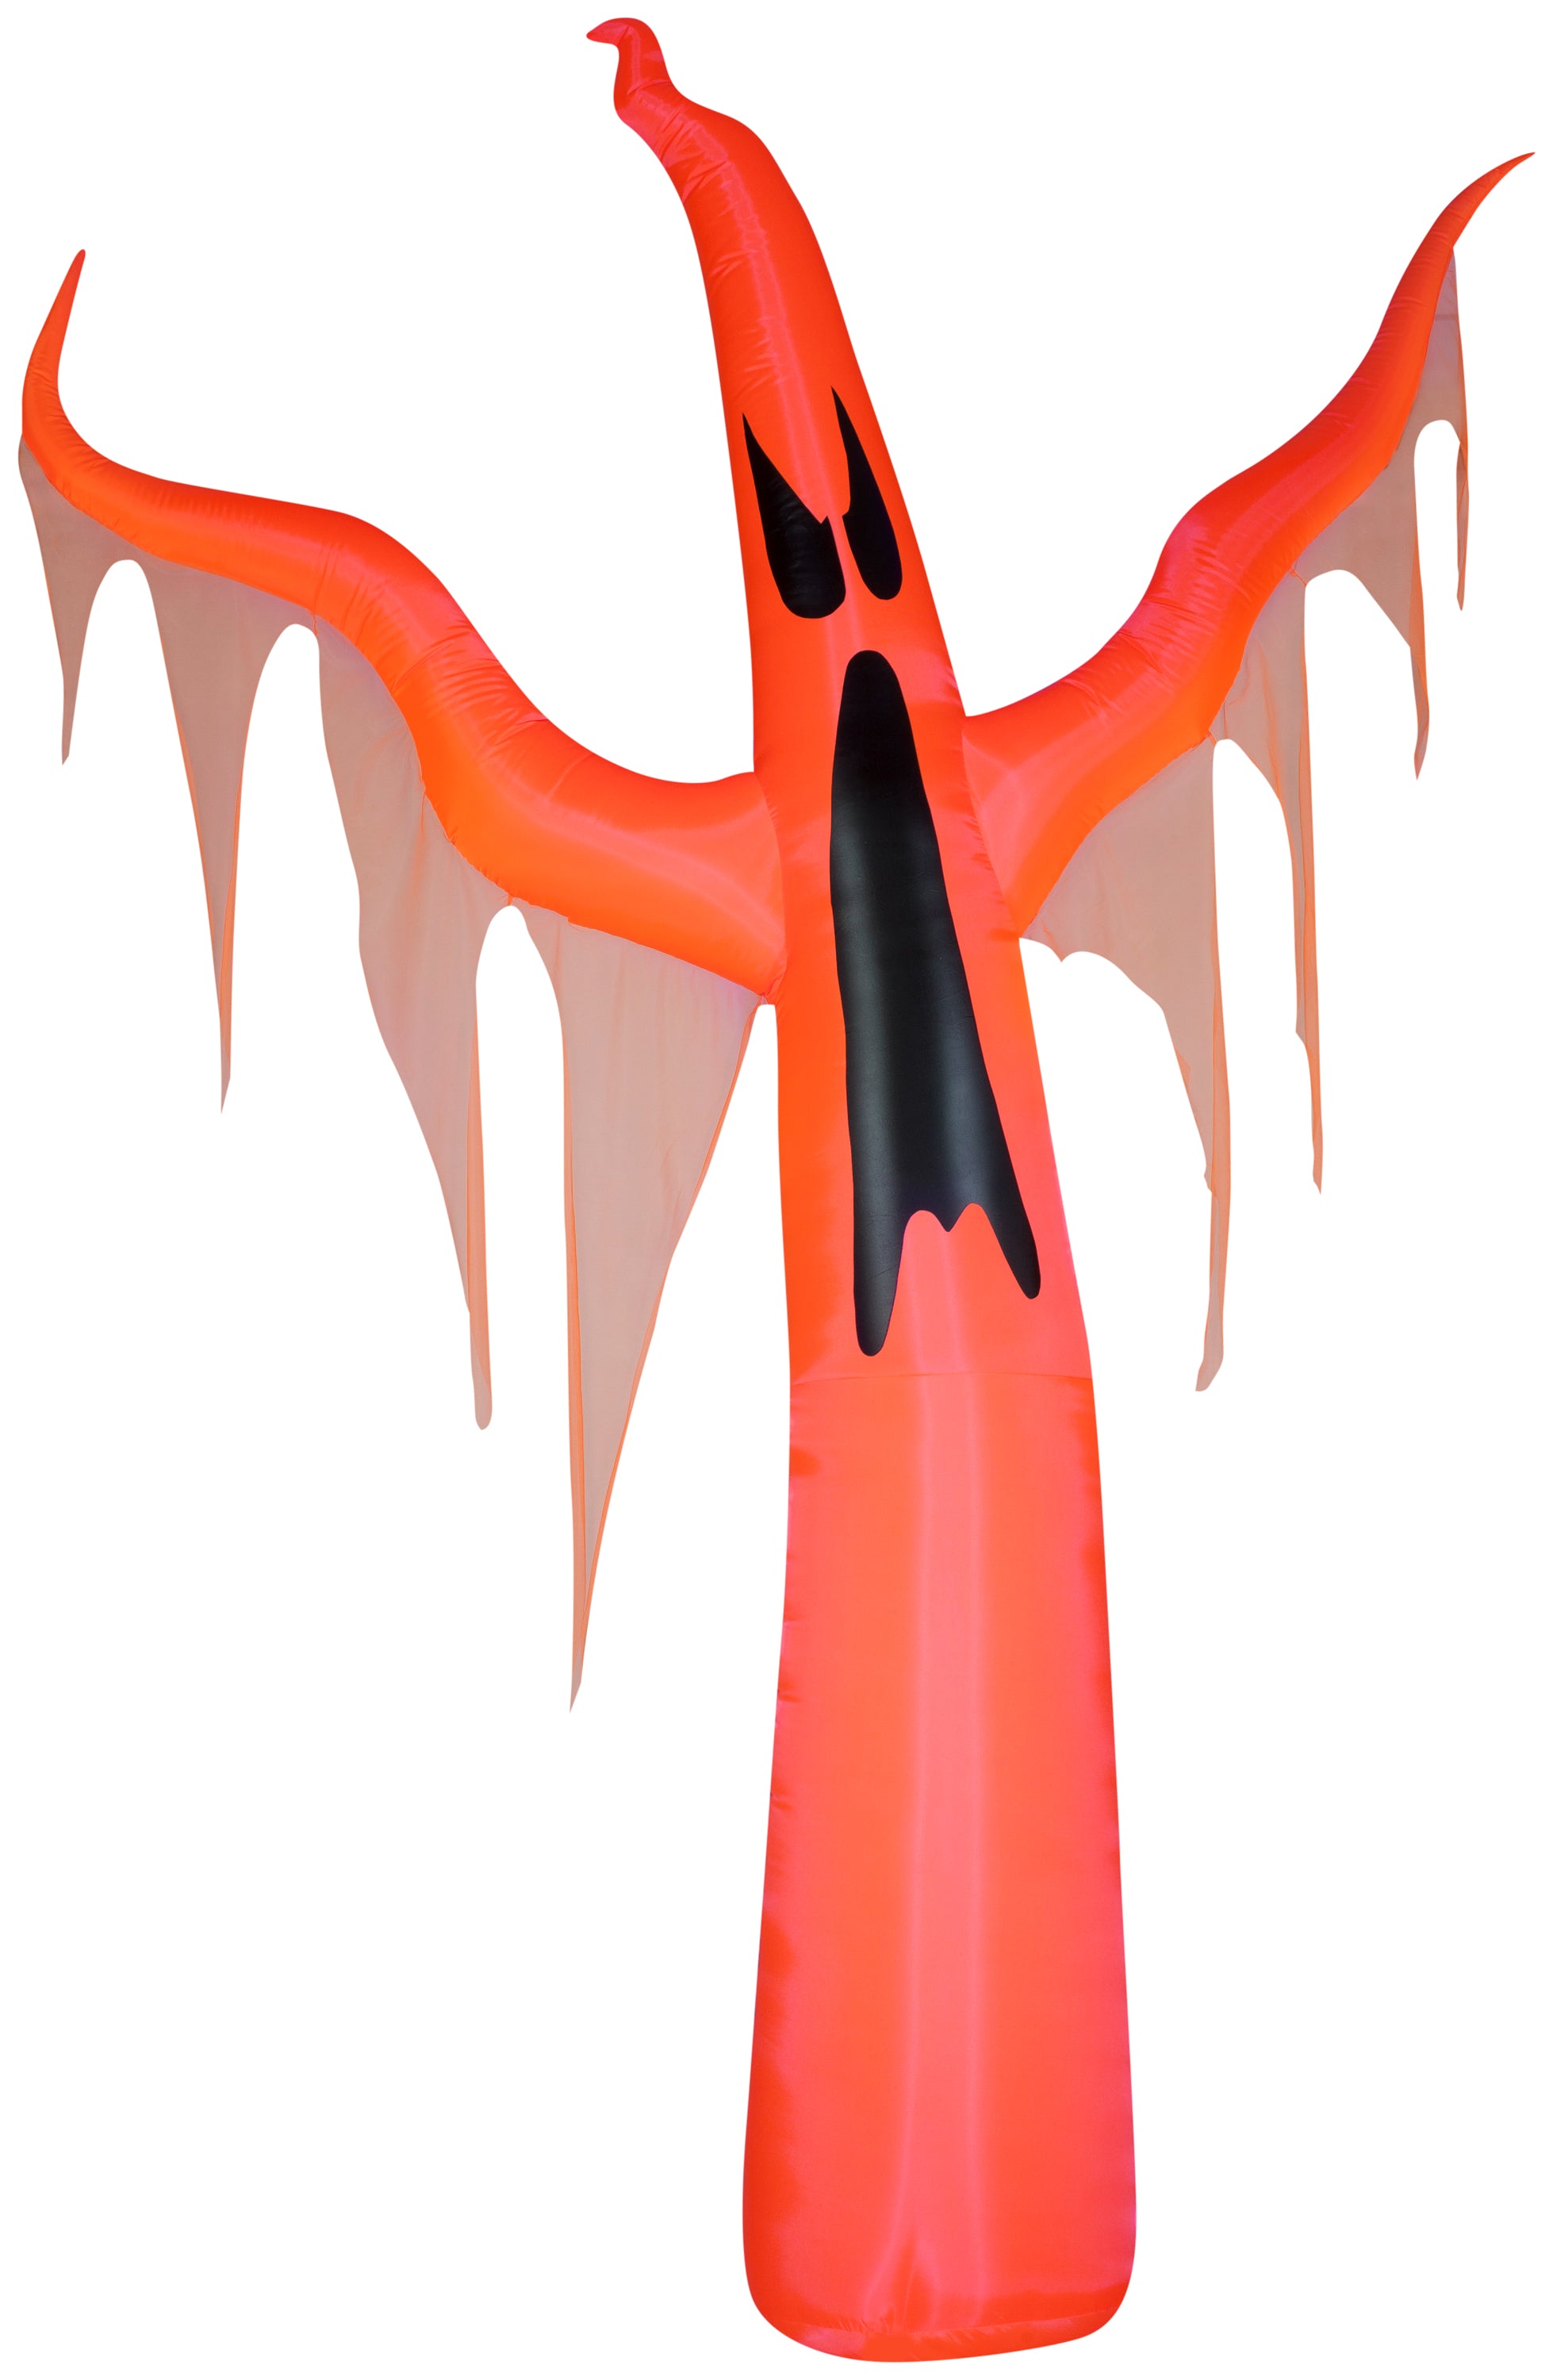 Gemmy Neon Christmas Airblown Inflatable w/ Black Light Orange Ghost Giant, 11 ft Tall, Red